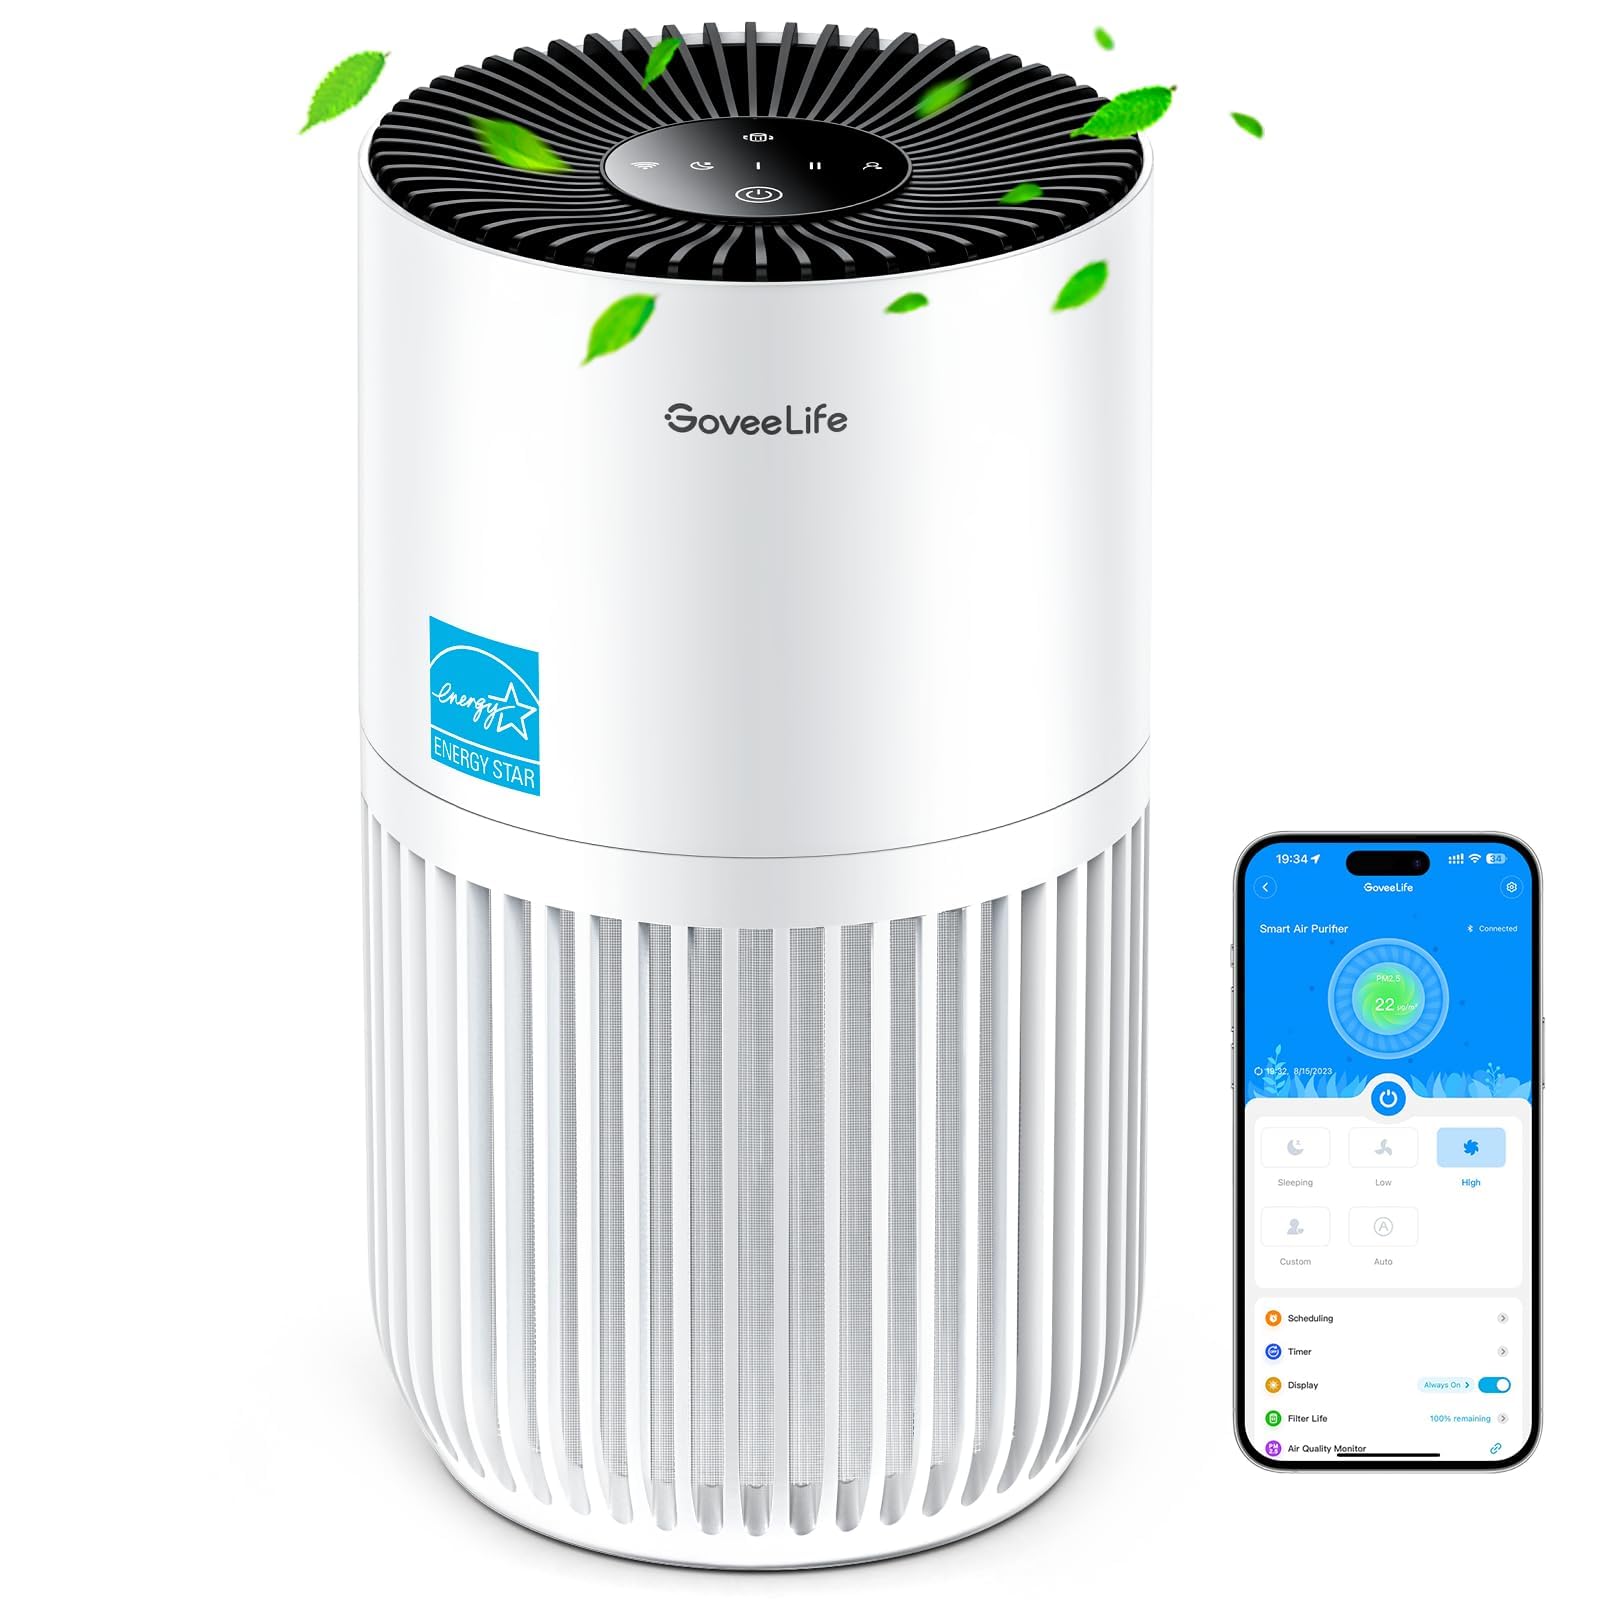 GoveeLife Mini Air Purifier for Bedroom, HEPA Smart Filter Air Purifier with App Alexa Control for Pet Hair, Odors, Pollen, Smoke, Portable Air Cleaner with 3 Speeds $29.99